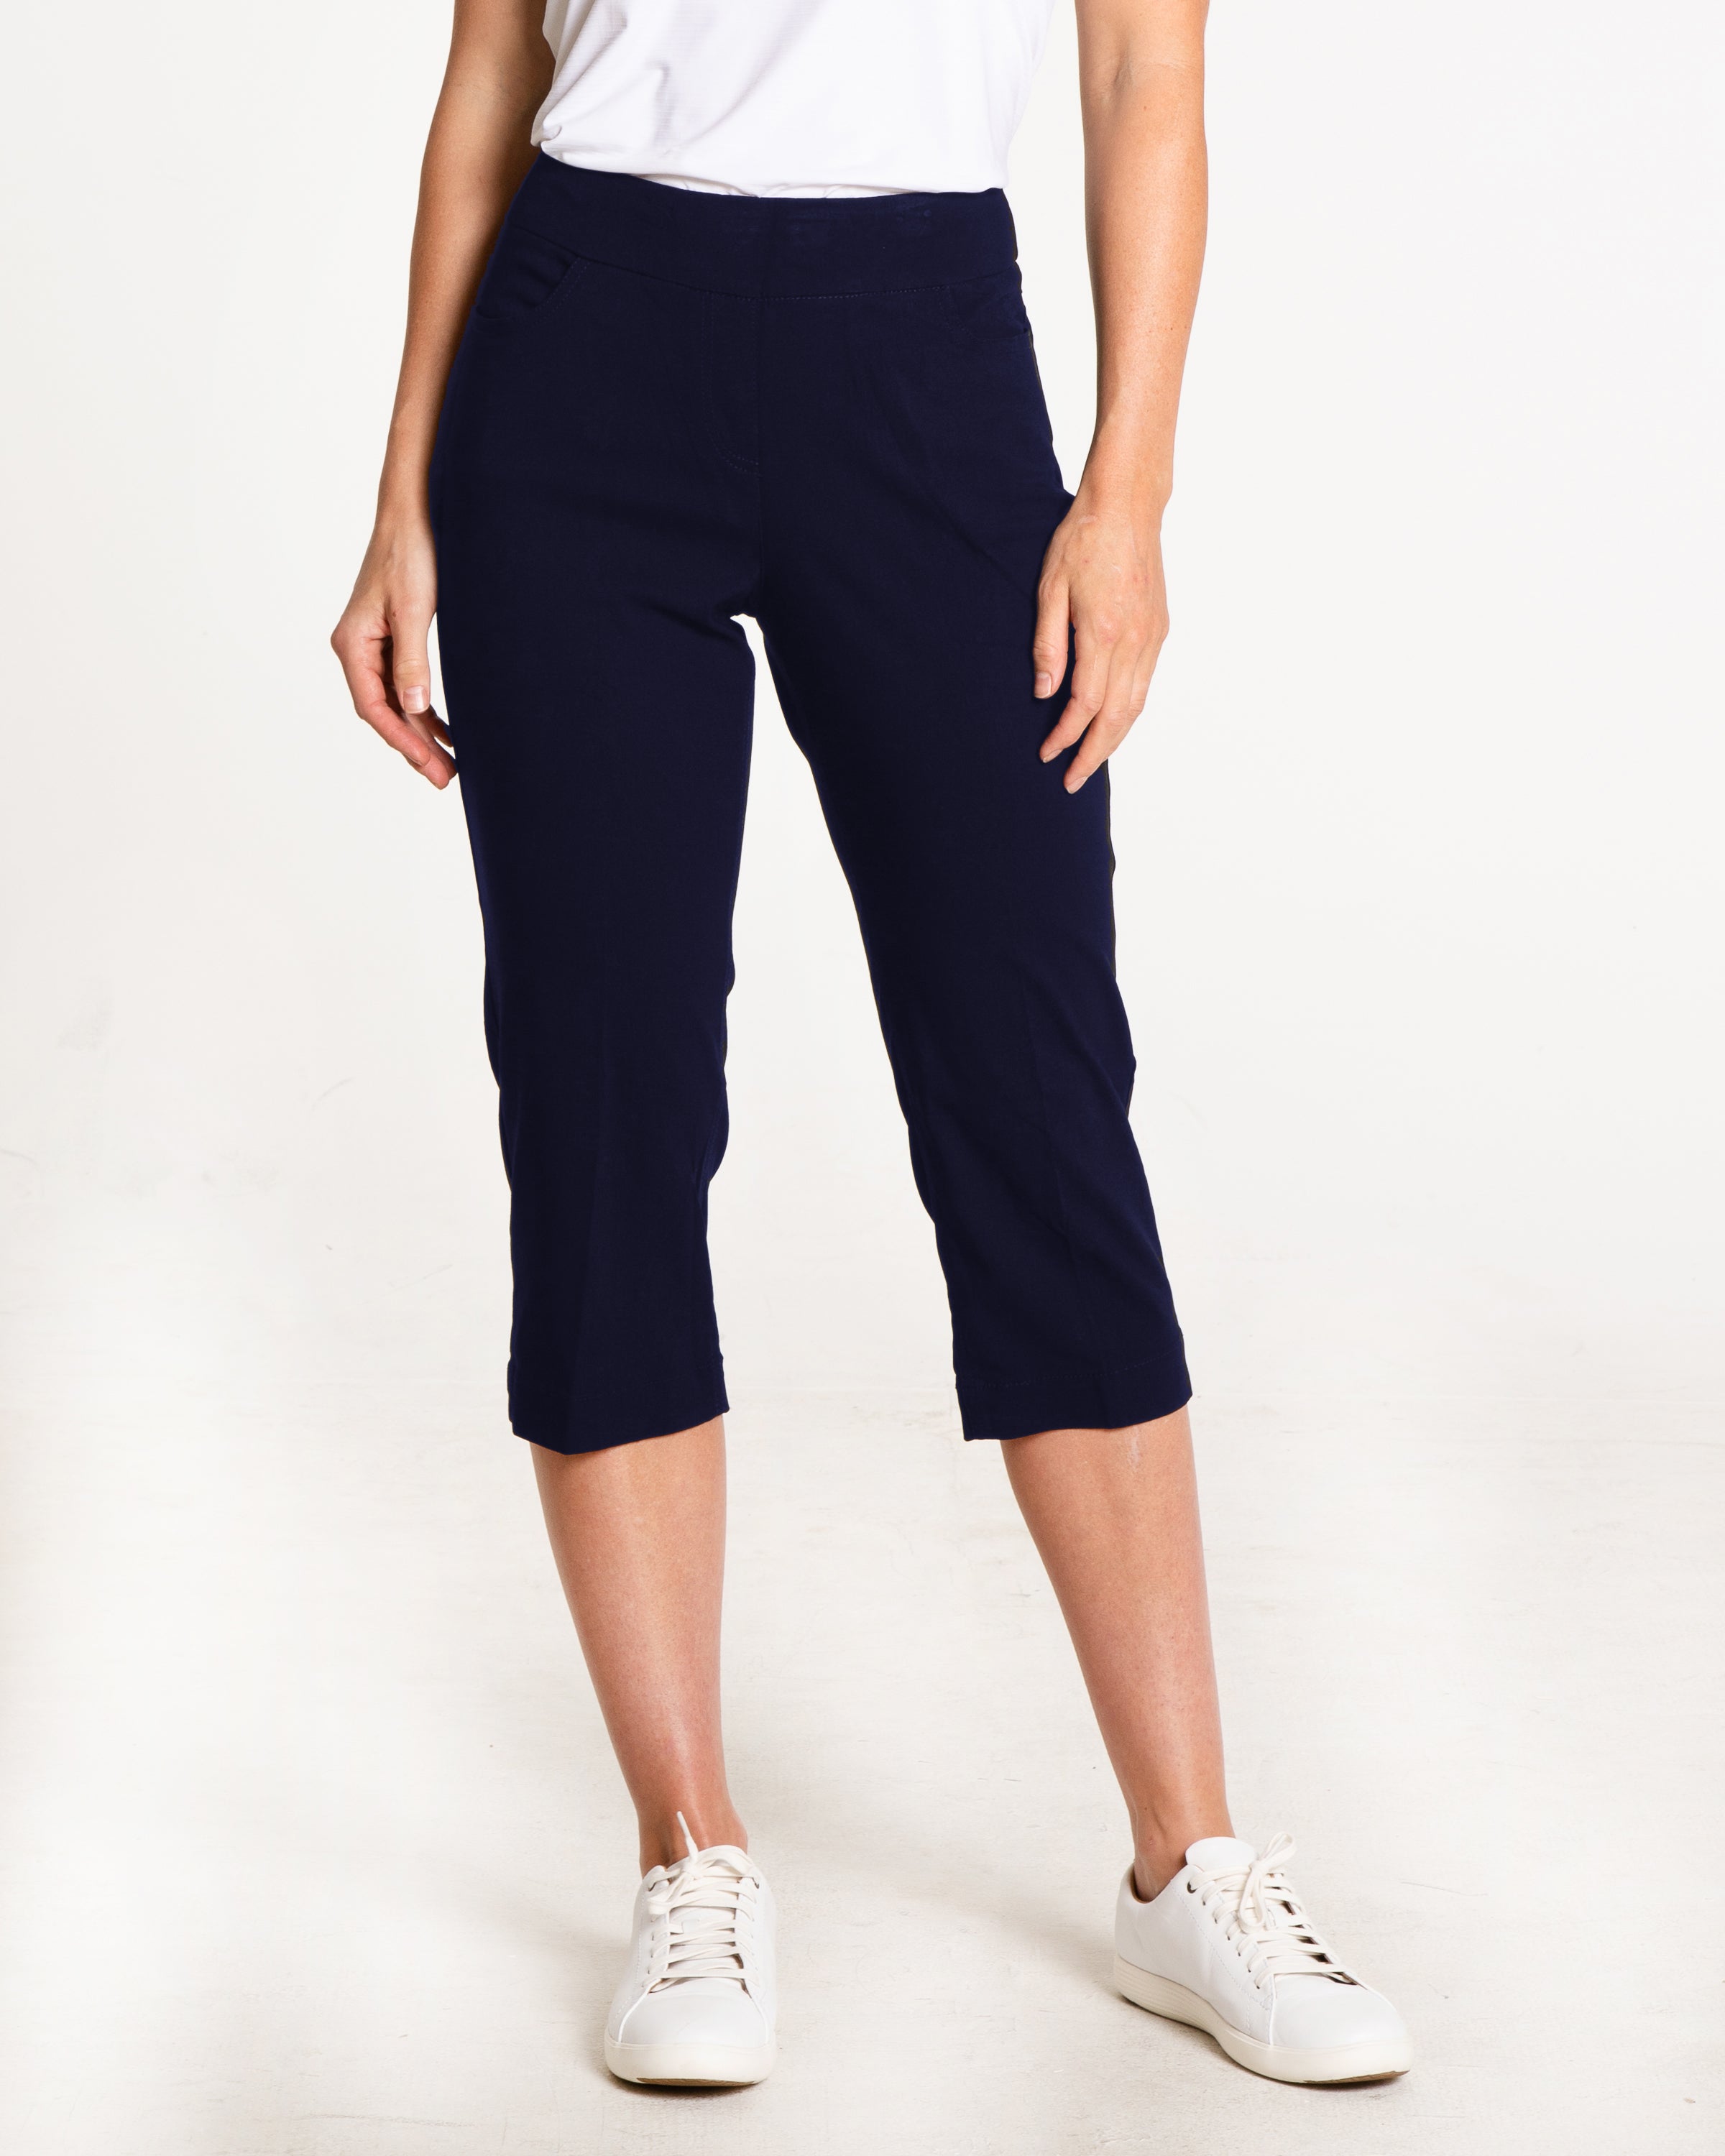 Women's Pull-On Capri Pant  Shopping outfit, Golf outfit, Capri pants